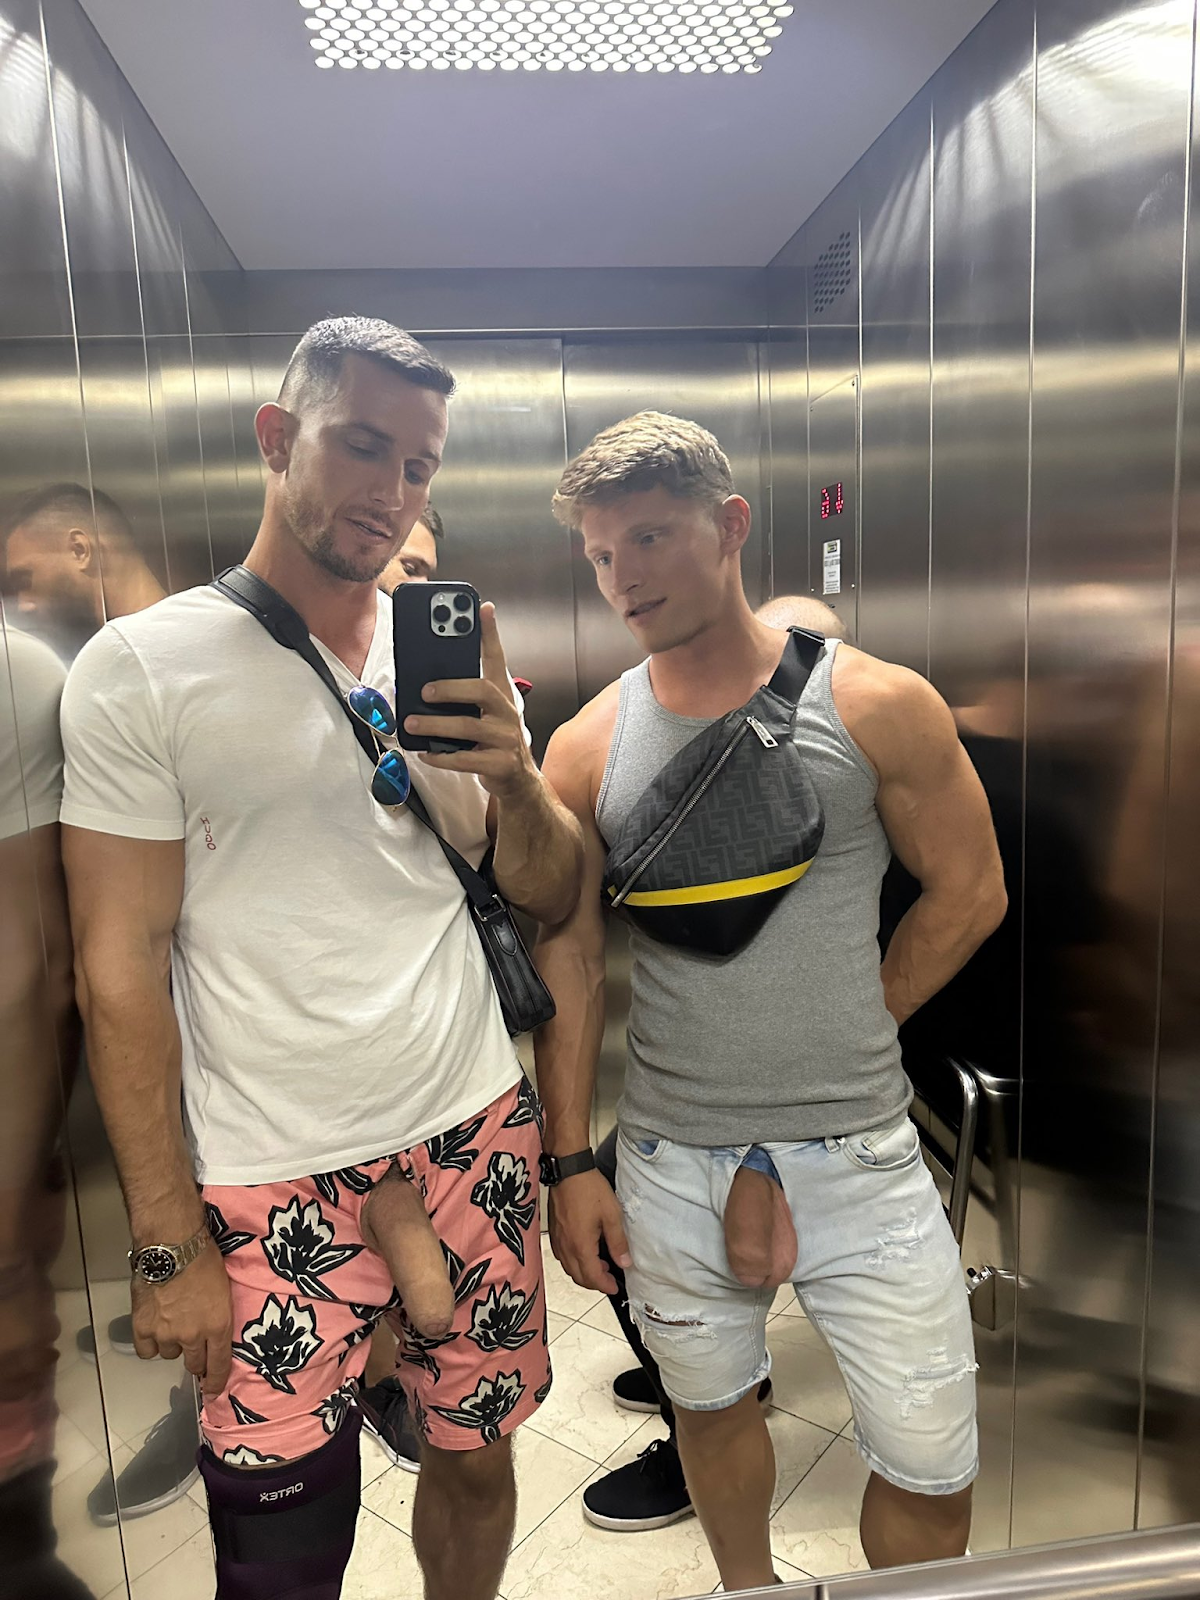 daniel knight and jakub stefano selfie in elevator with their flaccid dicks hanging out of their shorts